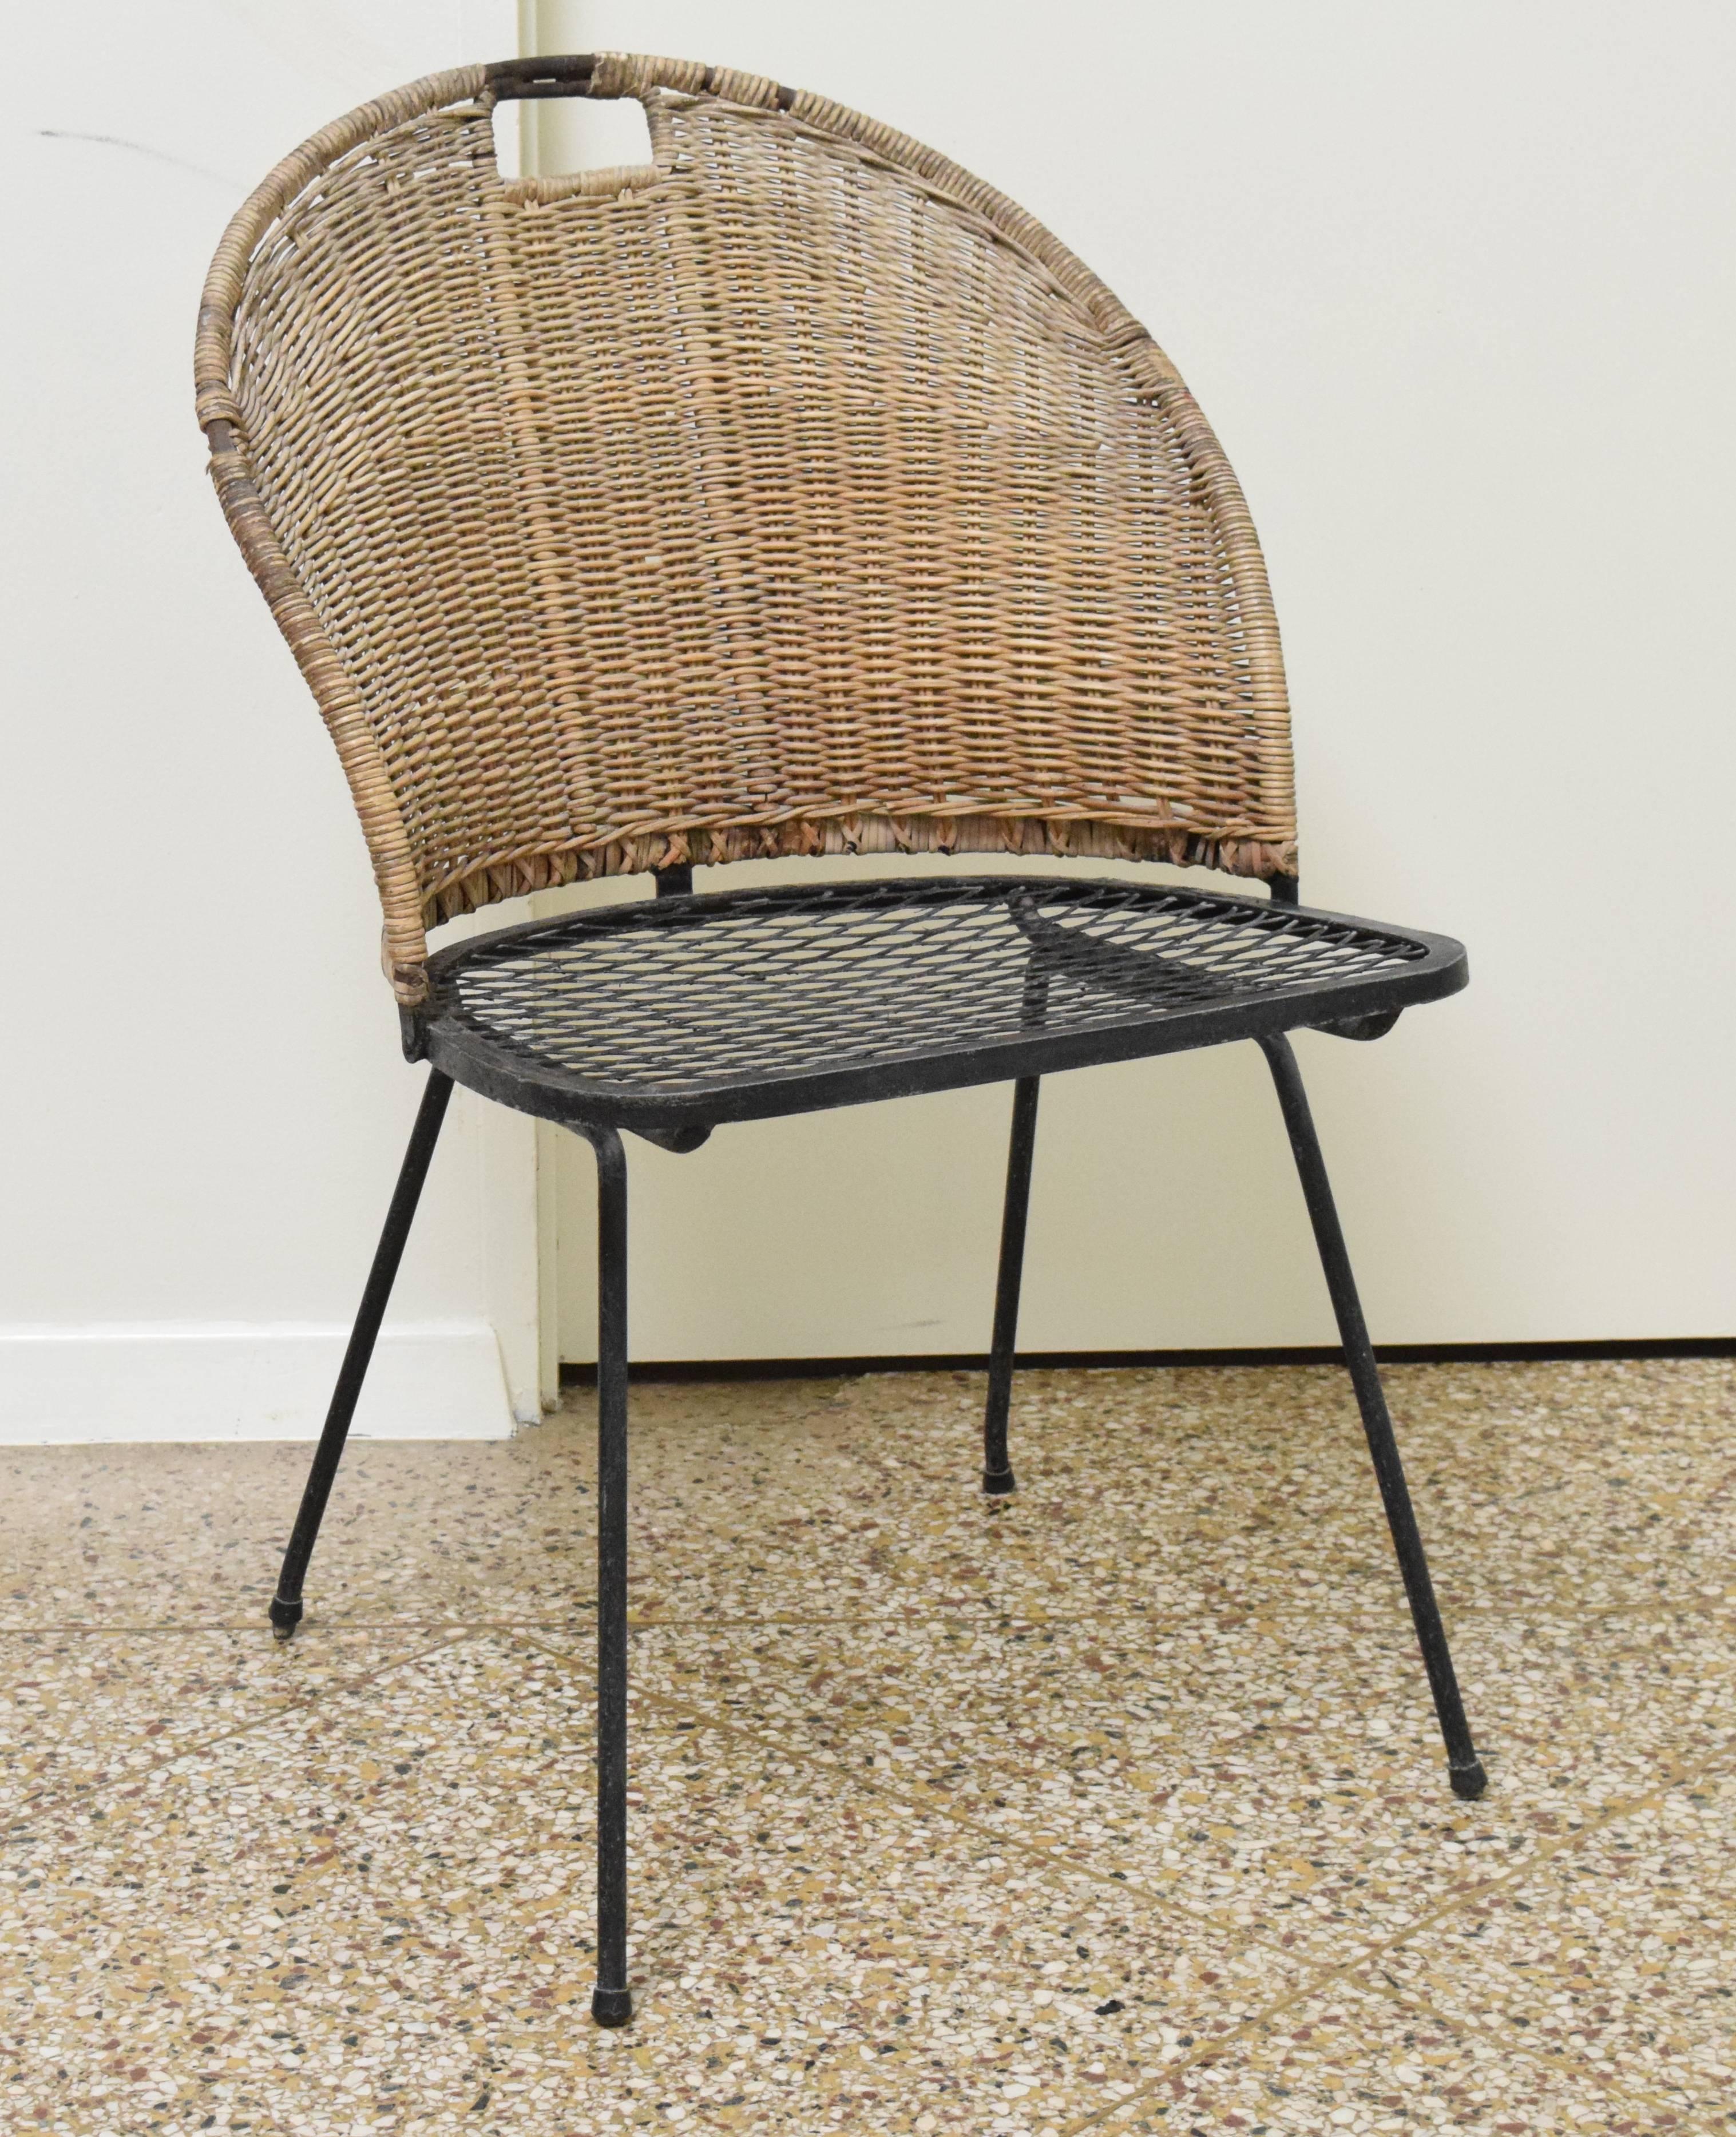 Store closing-- last day is 7/31. Offers welcome! Tub chair model E2608 in Italian wicker by Tempestini for Salterini, circa 1952. Many other Salterini and Woodard pieces also available-- please inquire for details.